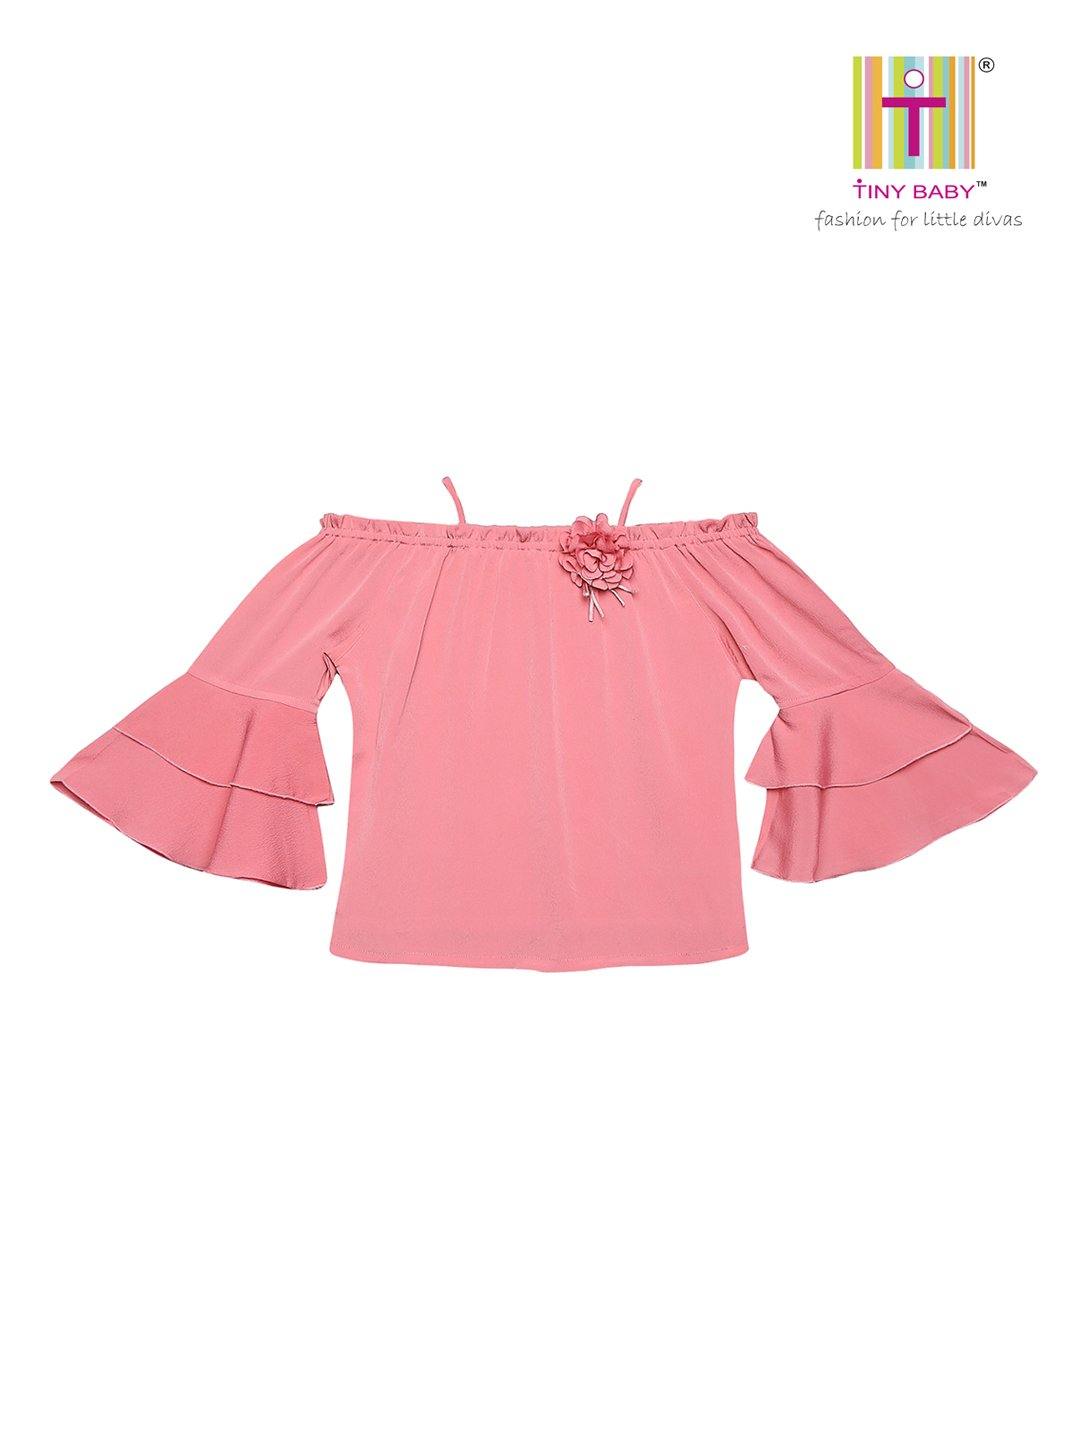 Tiny Baby Pink Colored Top - TINY BABY INDIA shop.tinybaby.in